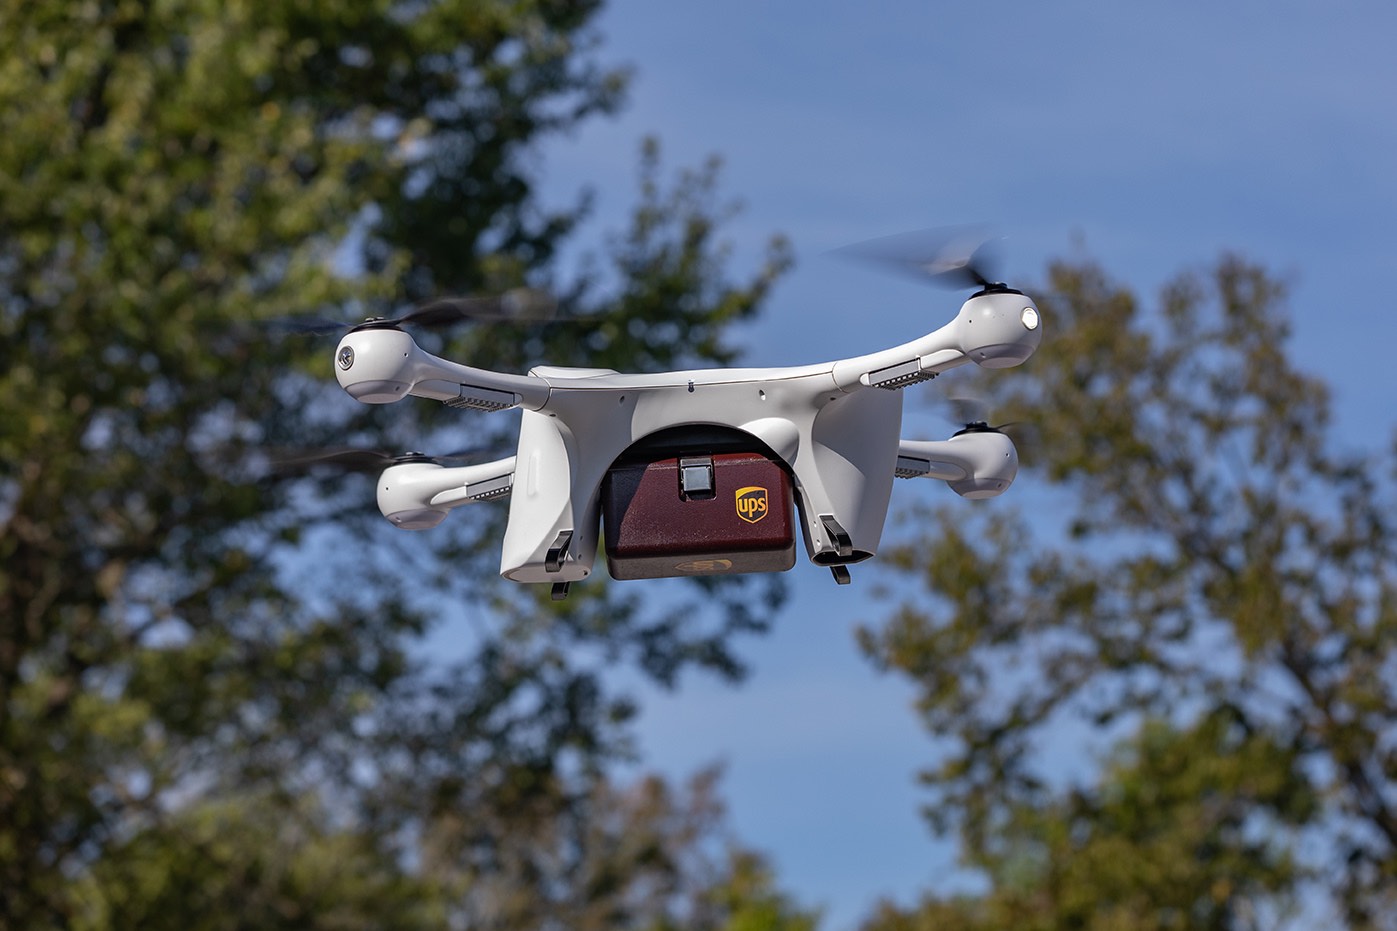 Drone carrying UPS package.